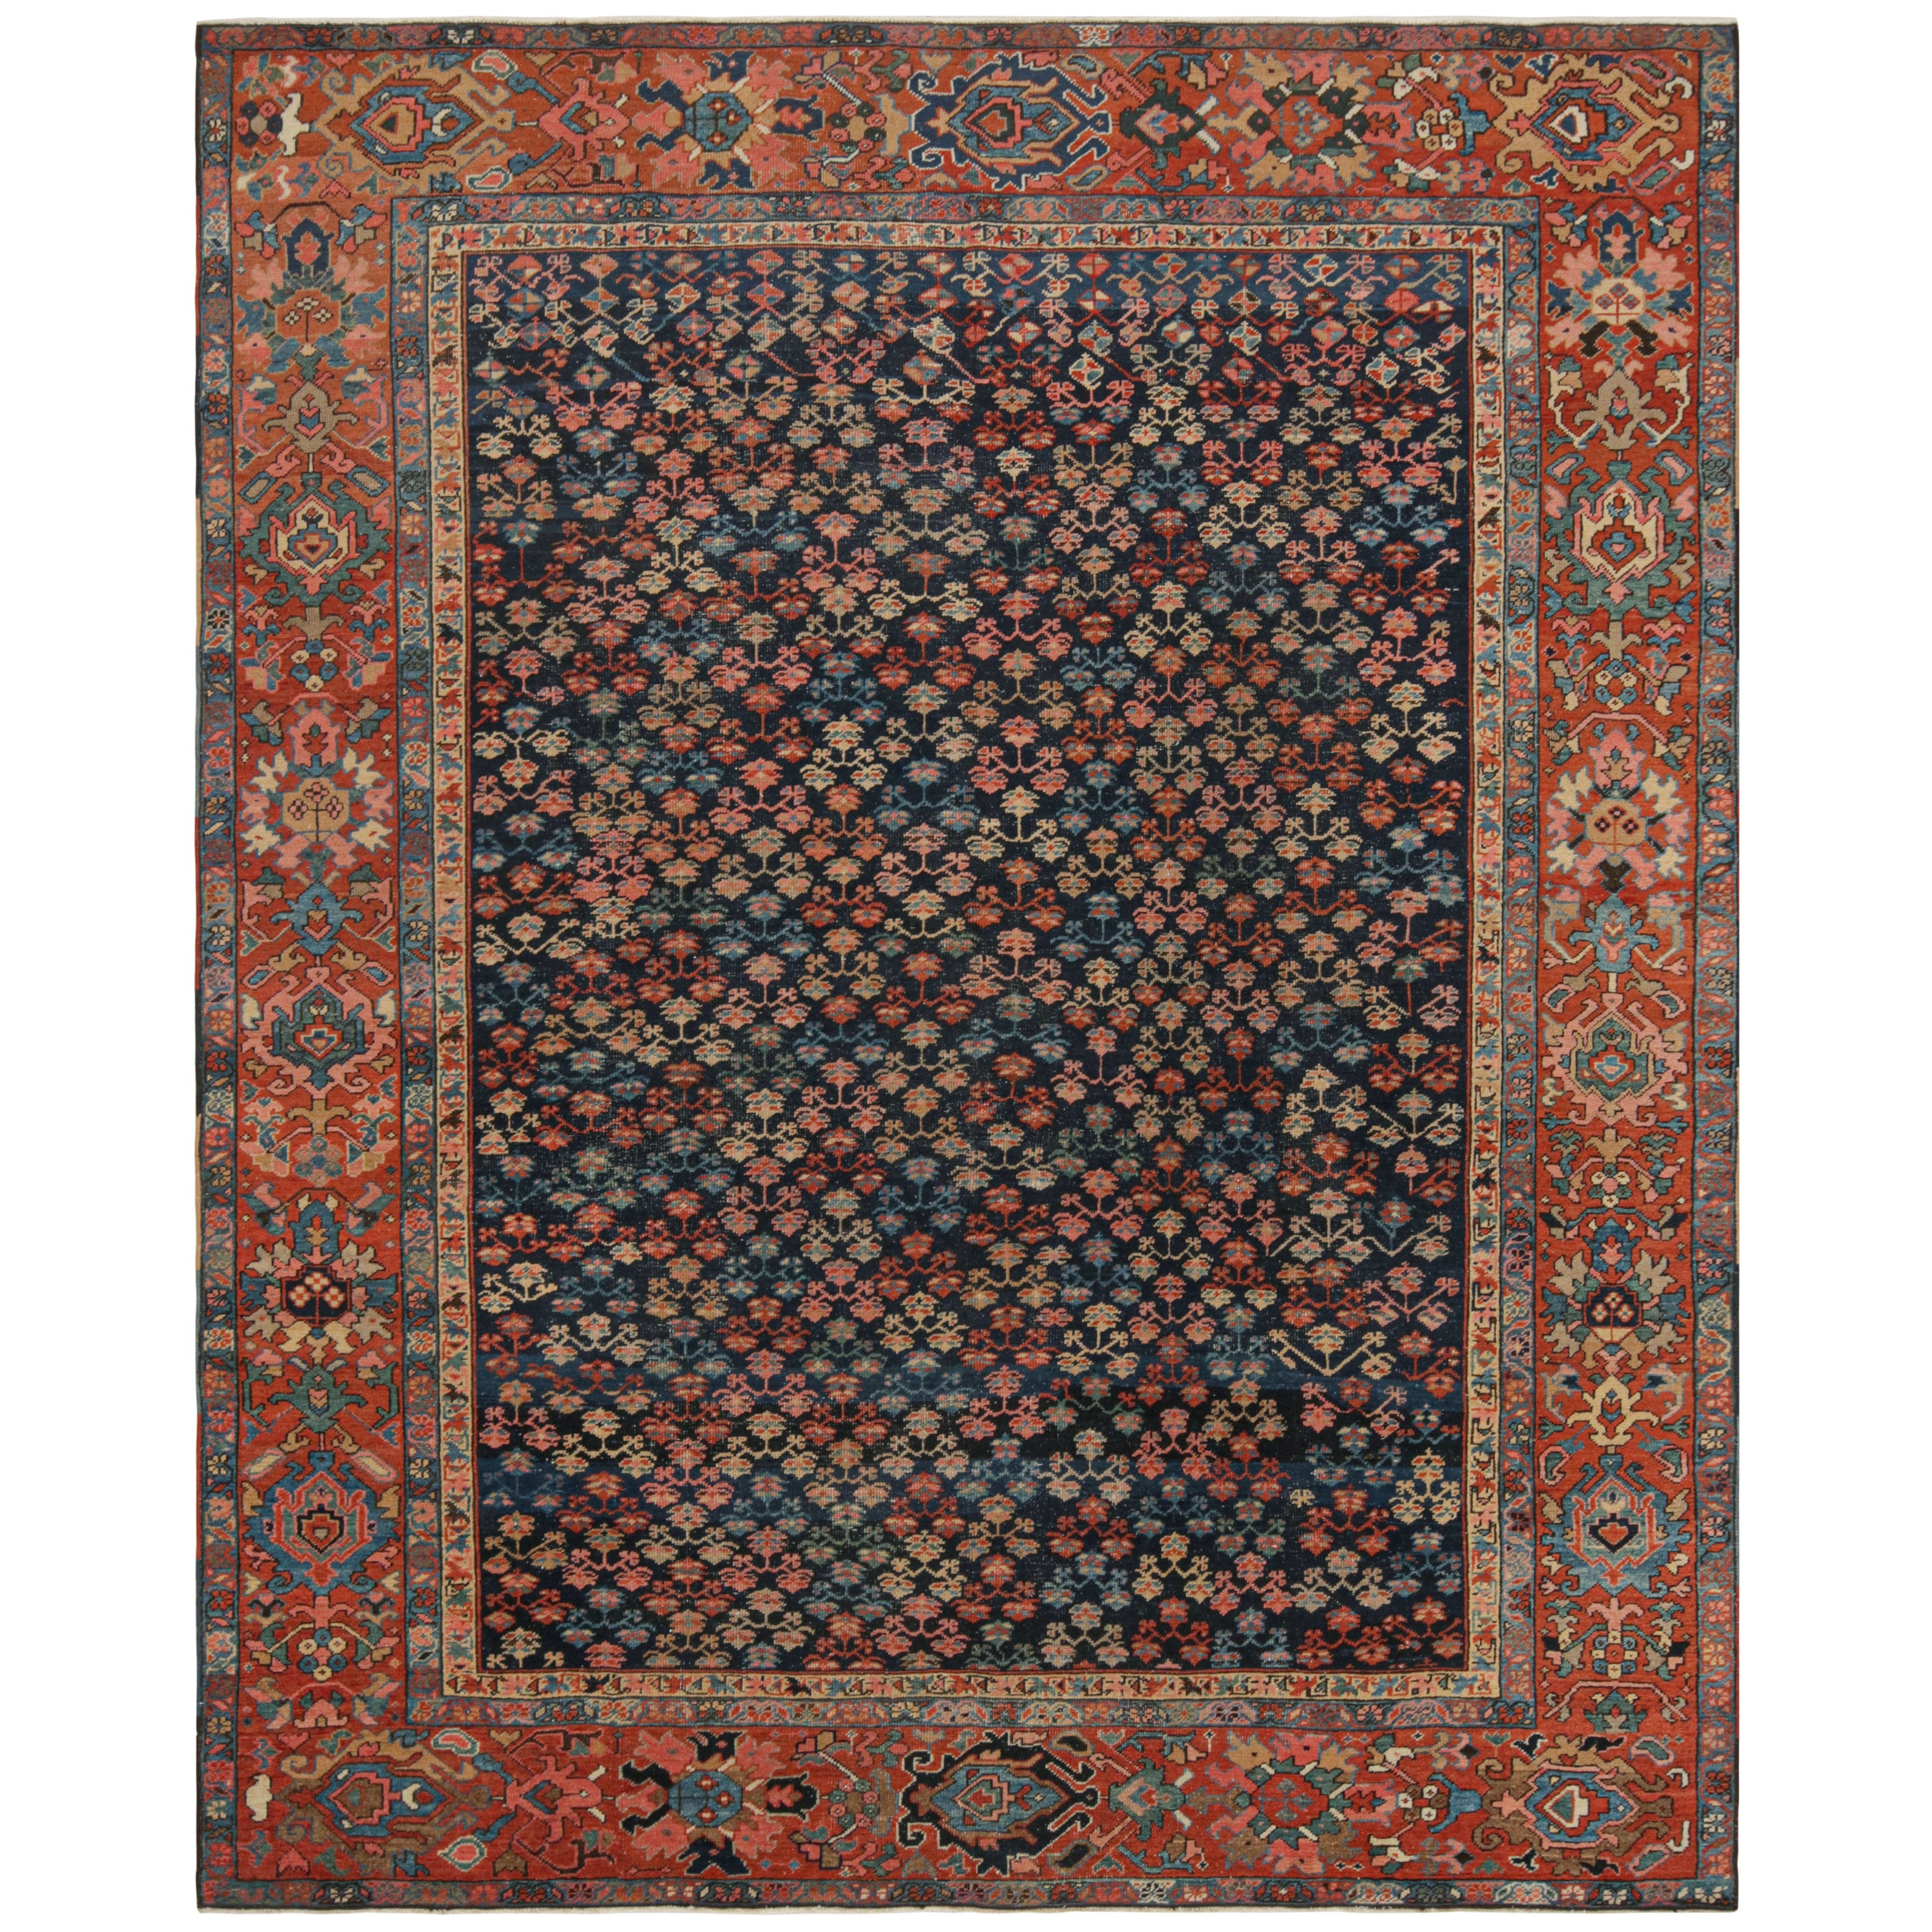 Antique Persian Bakshaish Rug in Navy Blue with Floral Patterns from Rug & Kilim For Sale